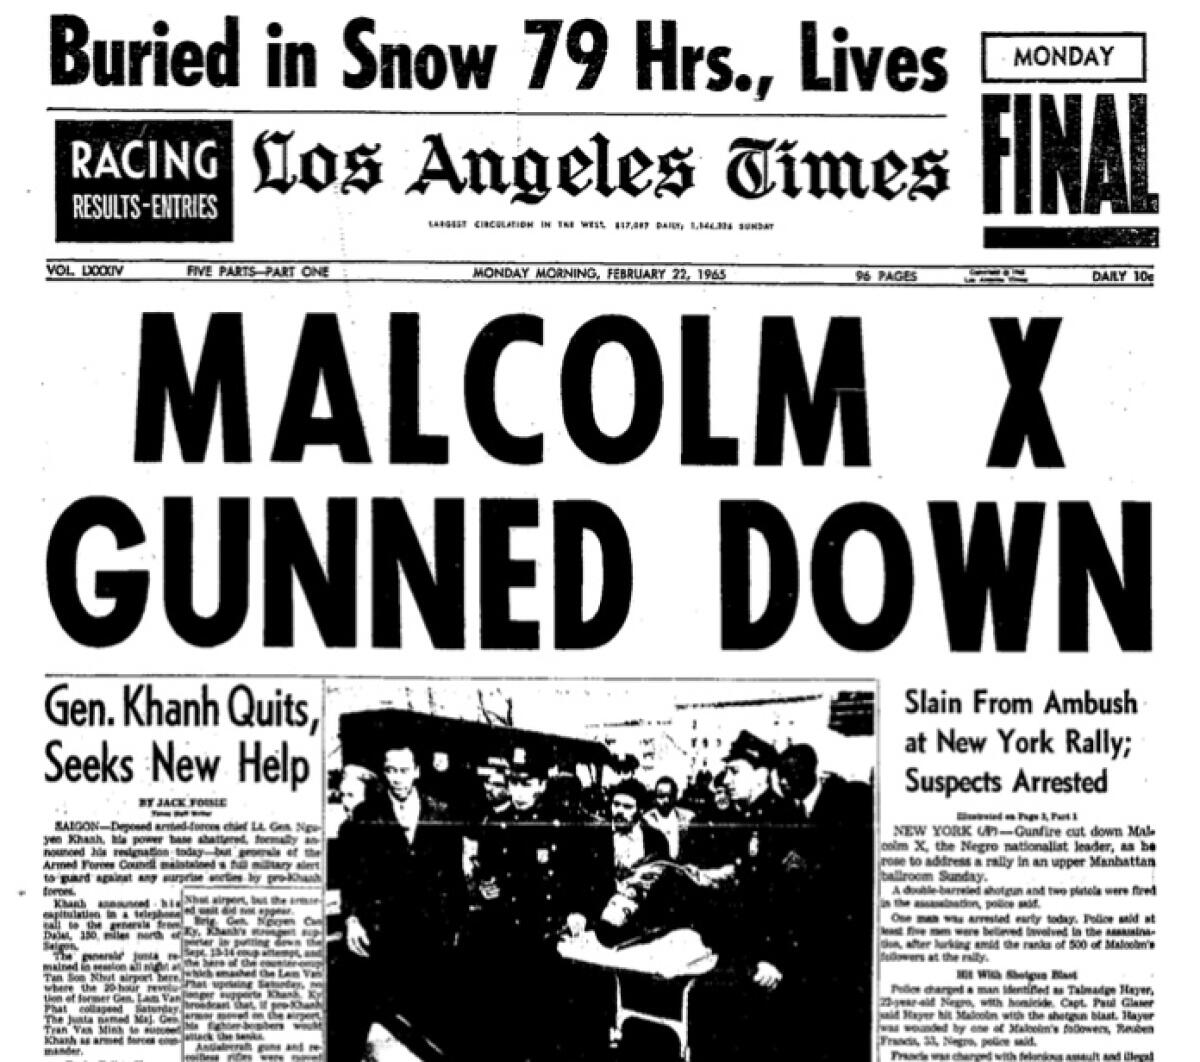 The front page of the Feb. 22, 1965, edition of the Los Angeles Times announcing the assassination of Malcolm X. 